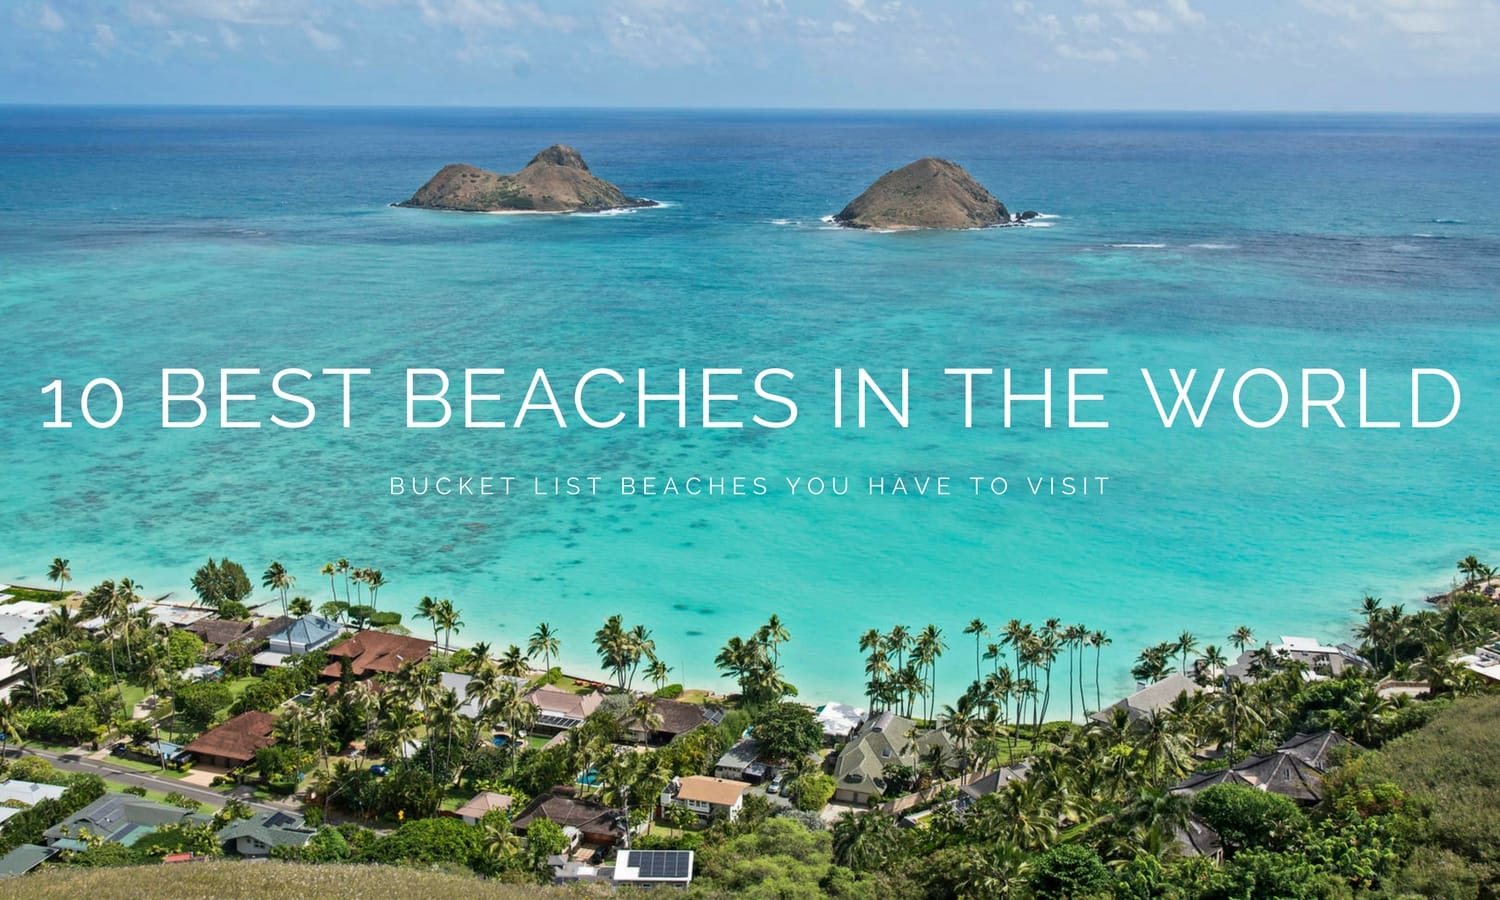 Bucket List Beaches You Have To Visit